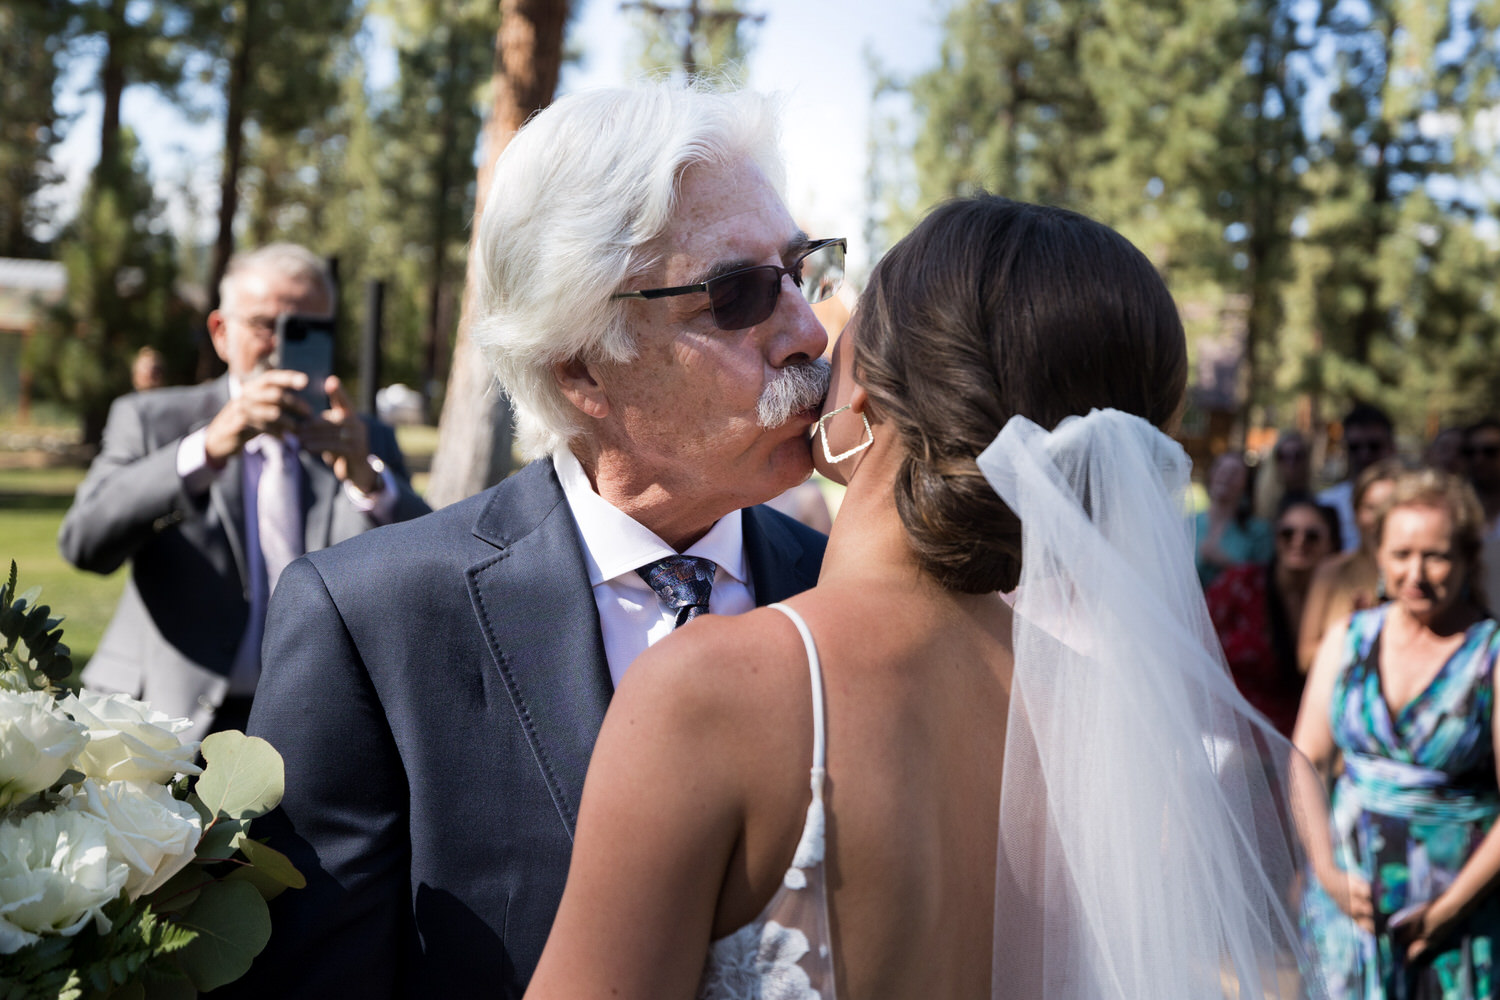 A candid moment between the bride and her dad, captured by wedding photographer Chris Werner.